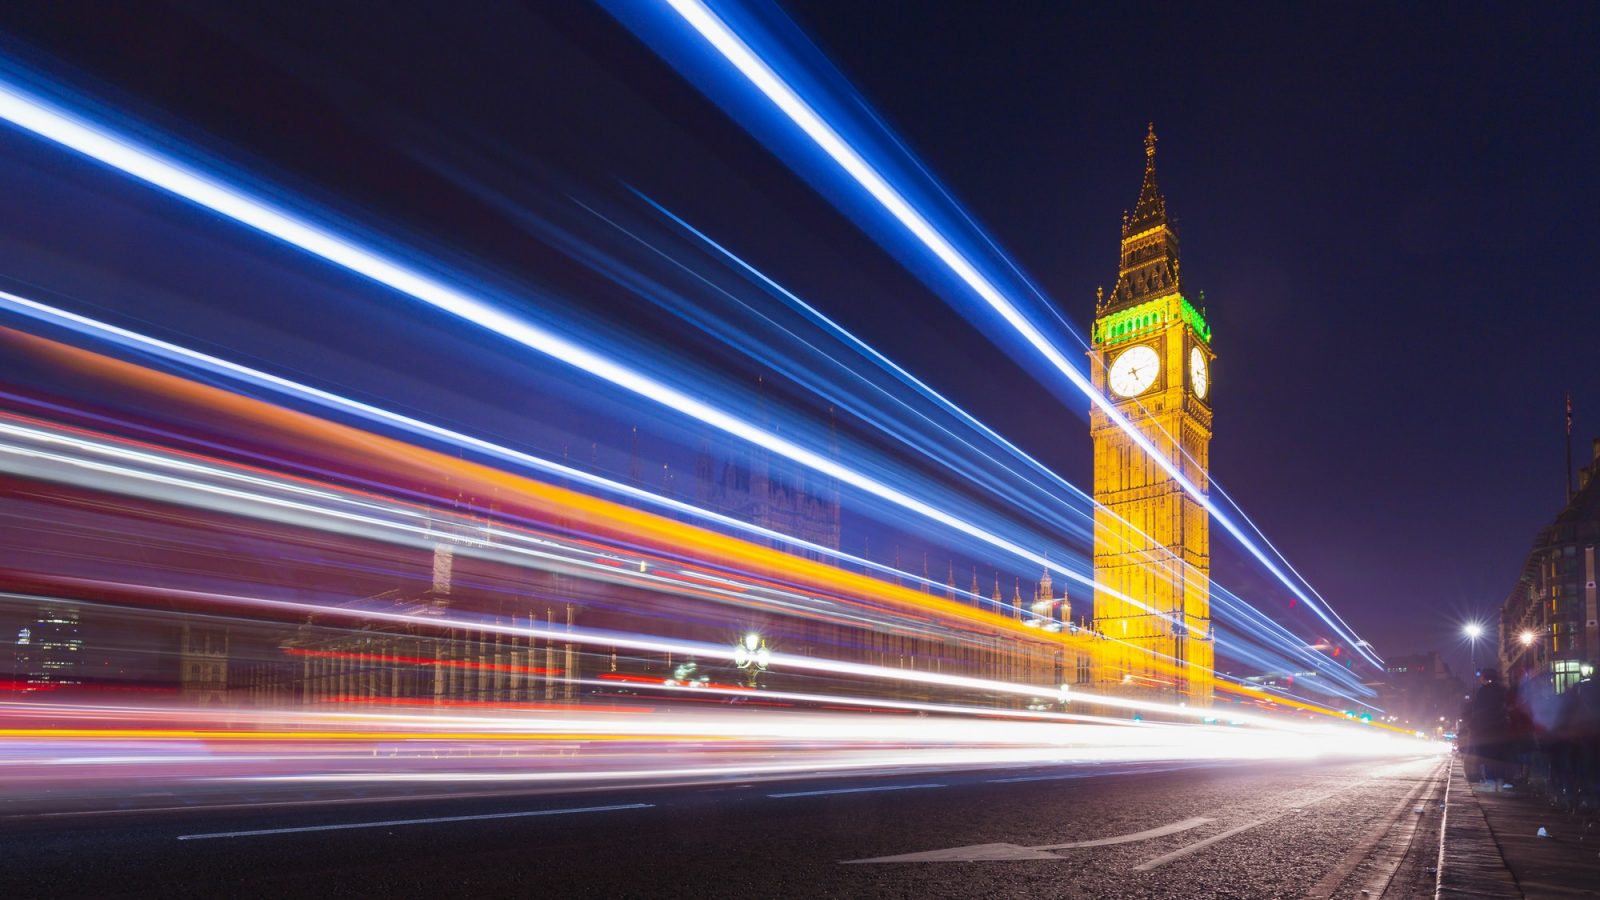 London Big Ben and Parliament with Bus Light Trails at Night, UK.